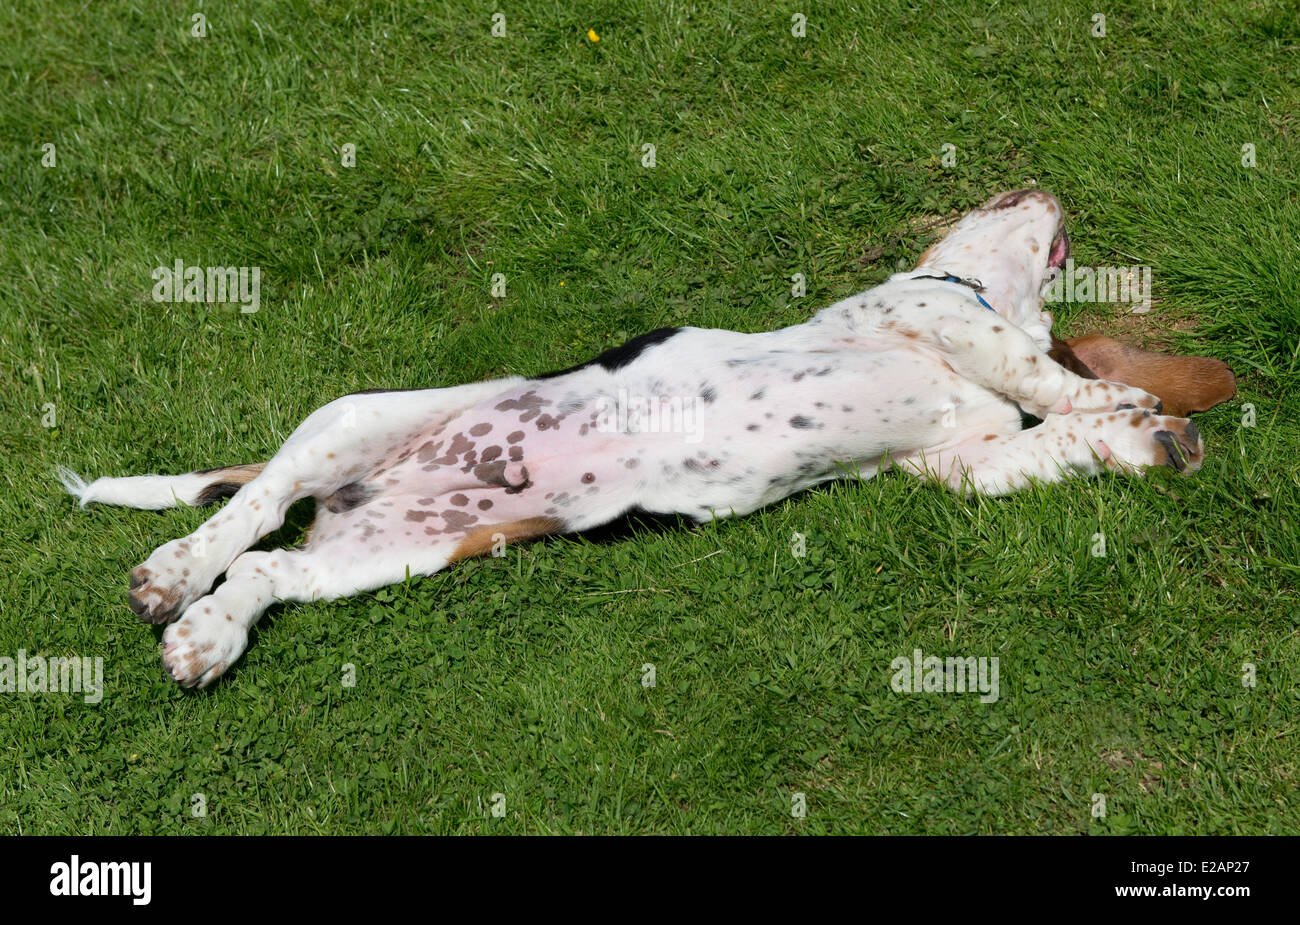 Four month old basset hound puppy rolling on his back Stock Photo